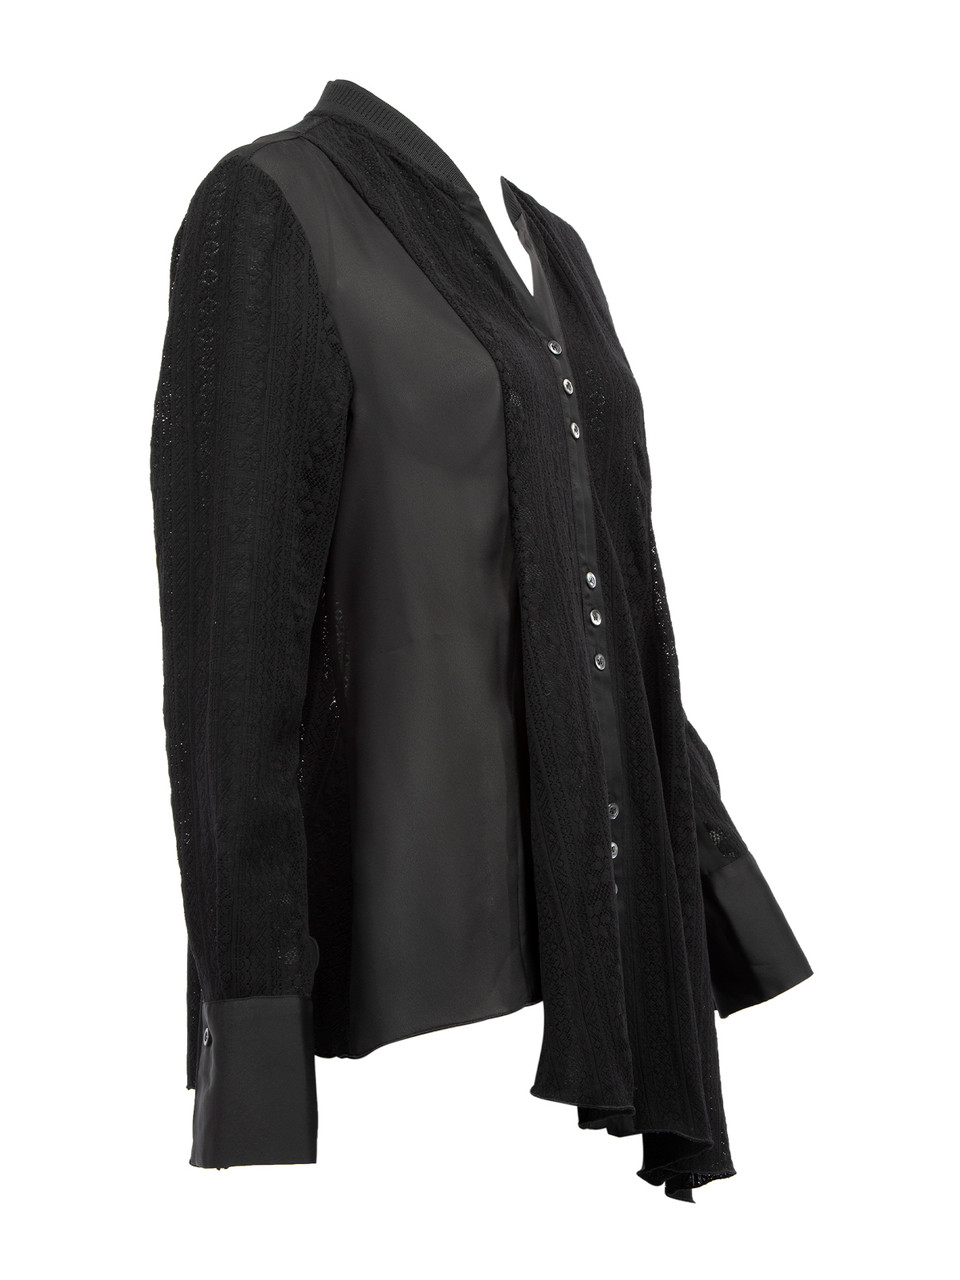 HIGH Everyday Couture Black Sheer Lace Button Up Shirt